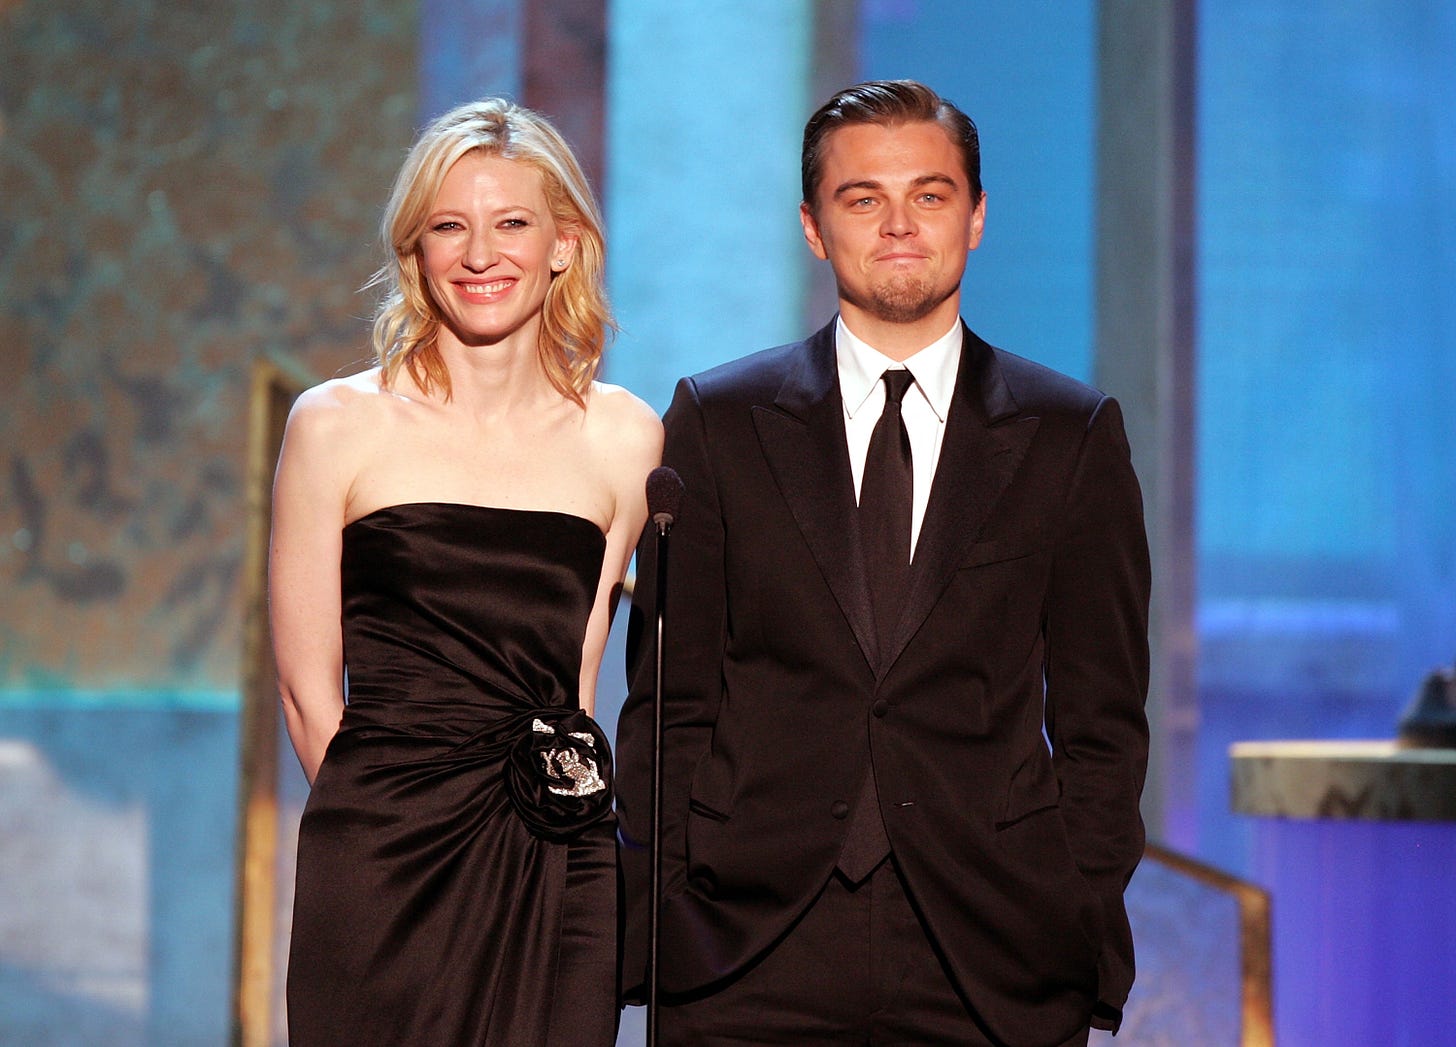 Leonardo DiCaprio and Cate Blanchett arrive at the premiere of their film The Aviator on January 7, 2005 in Berlin